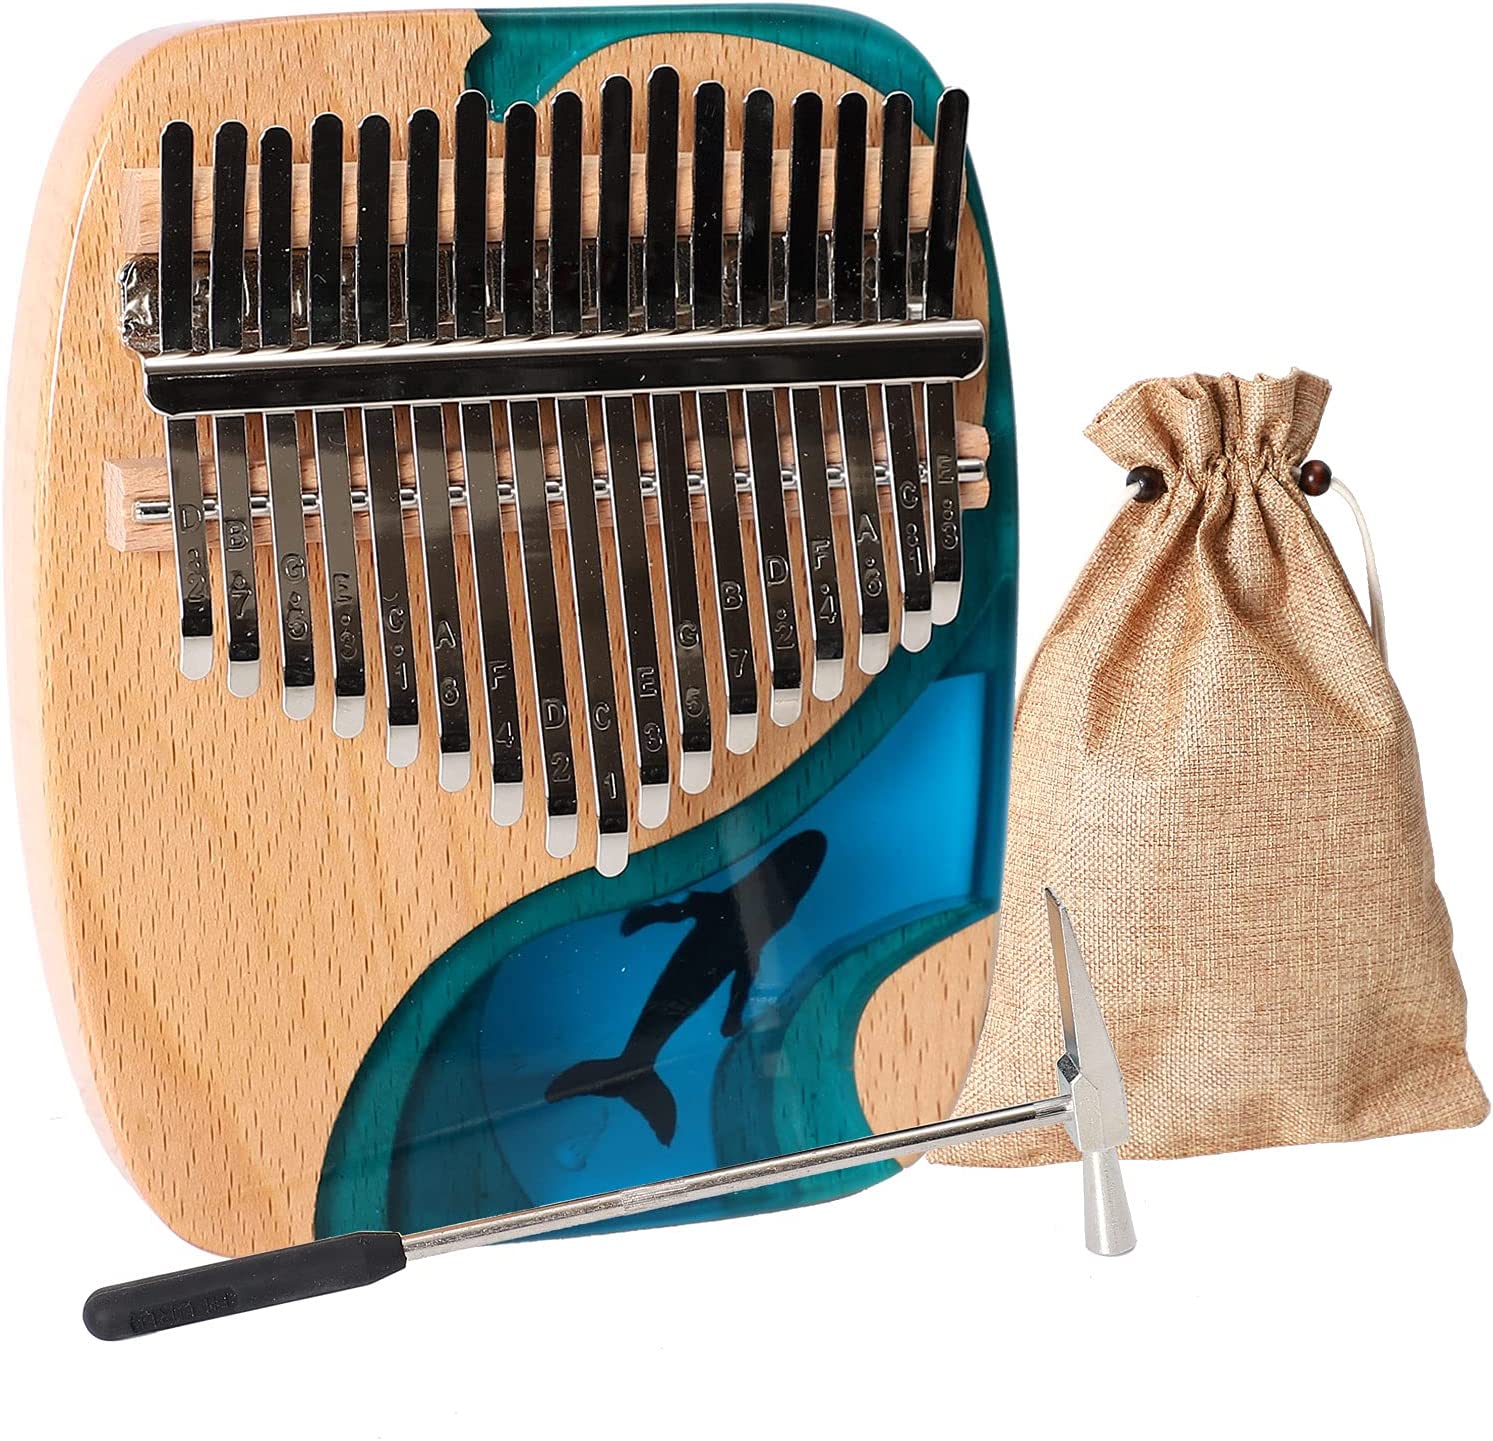 Kalimba Thumb Piano 17 Keys Blue Portable Finger Piano Gift for Kids and Adult Musical Instruments